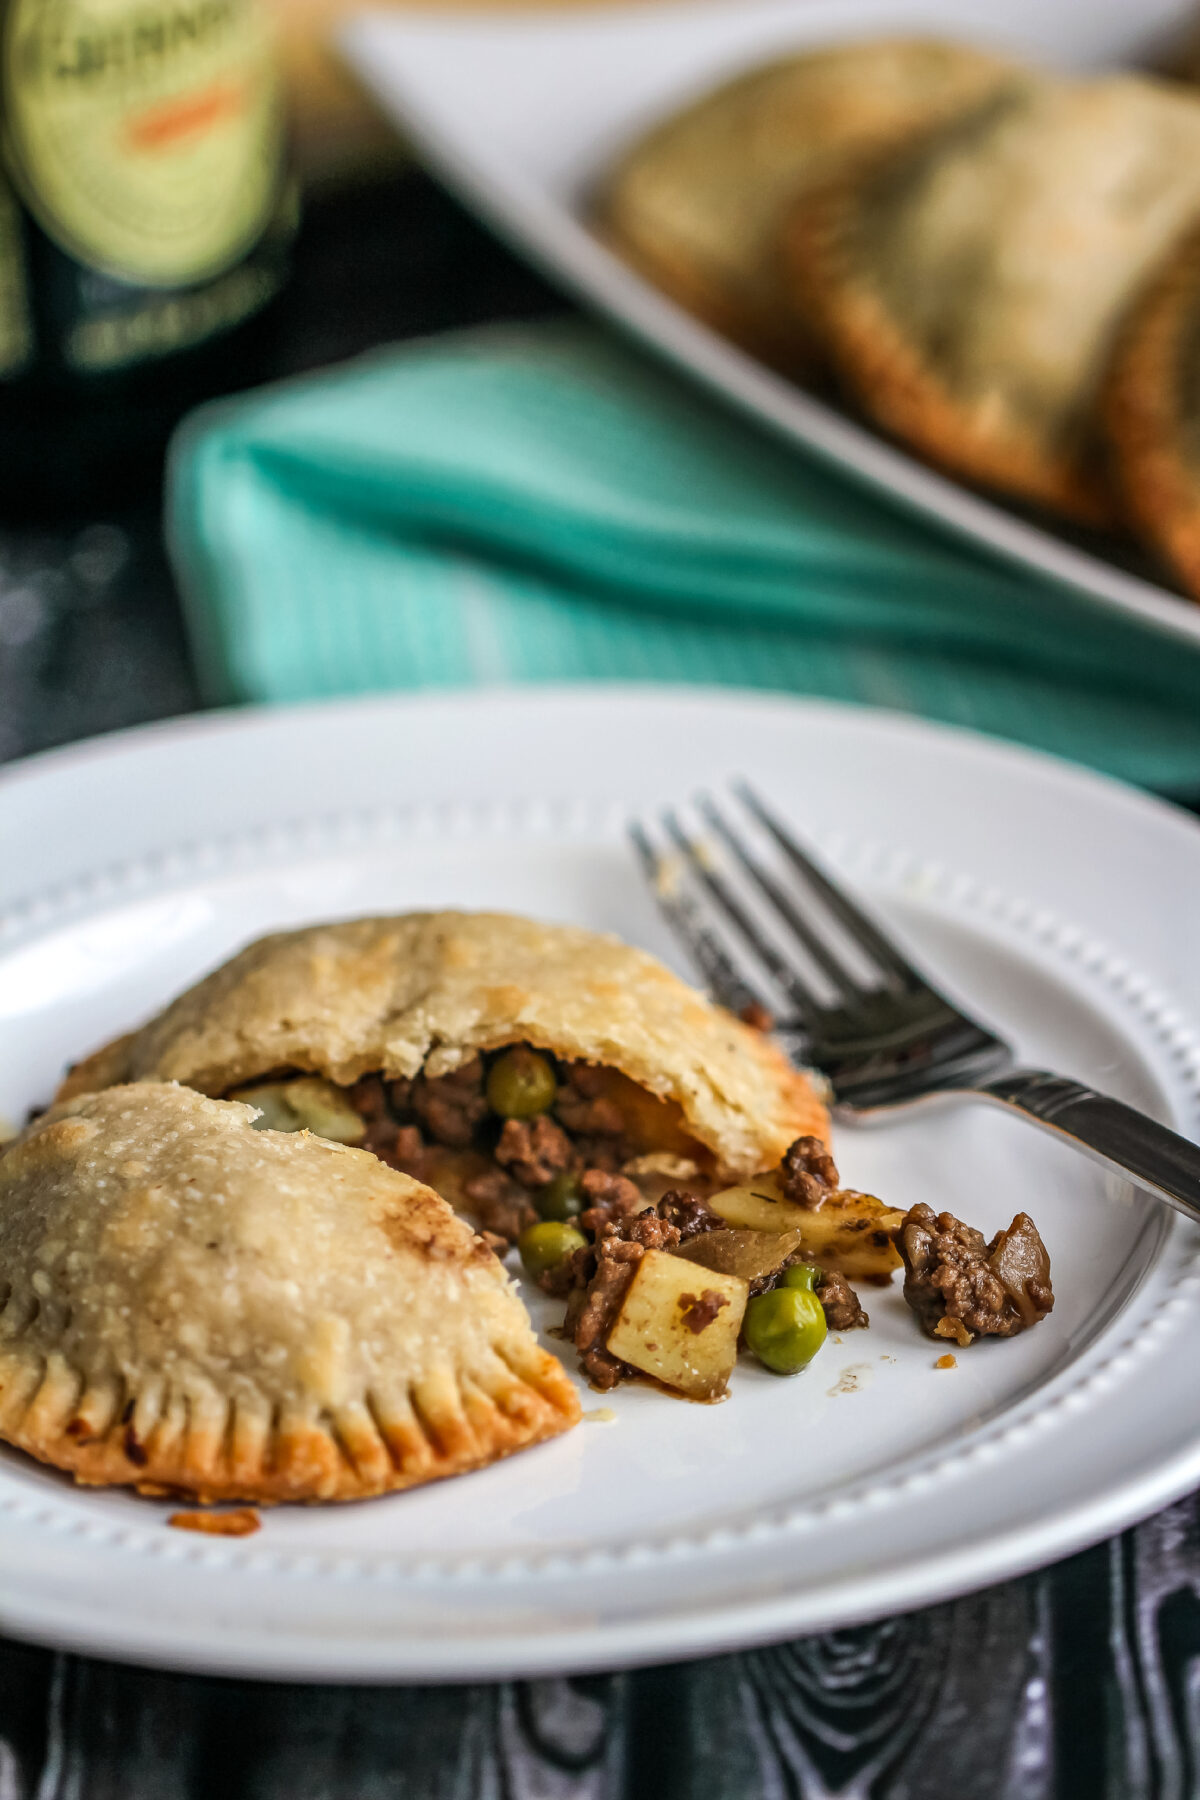 These savory beef & stout hand pies are perfect for St. Patrick's day. Filled with a rich beef & Guinness filling, they're sure to satisfy!